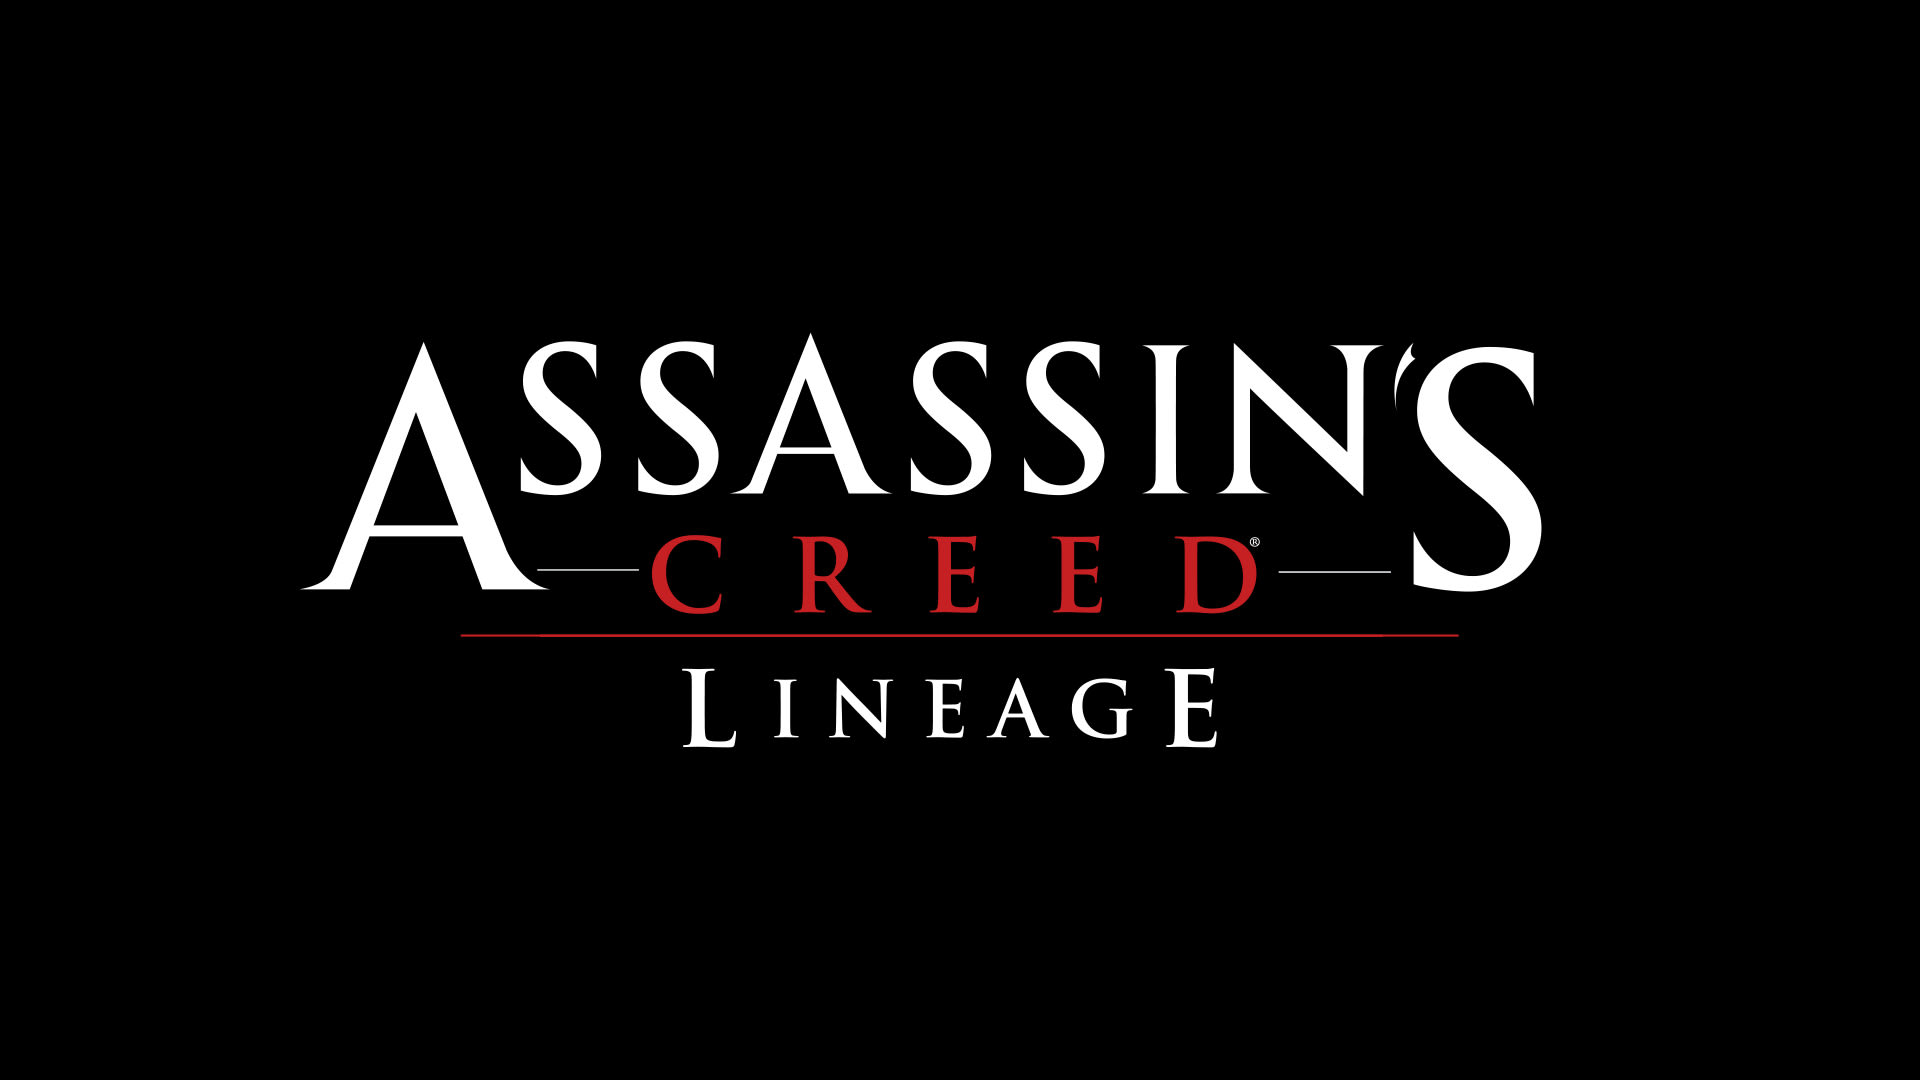 Assassin’s Creed Lineage